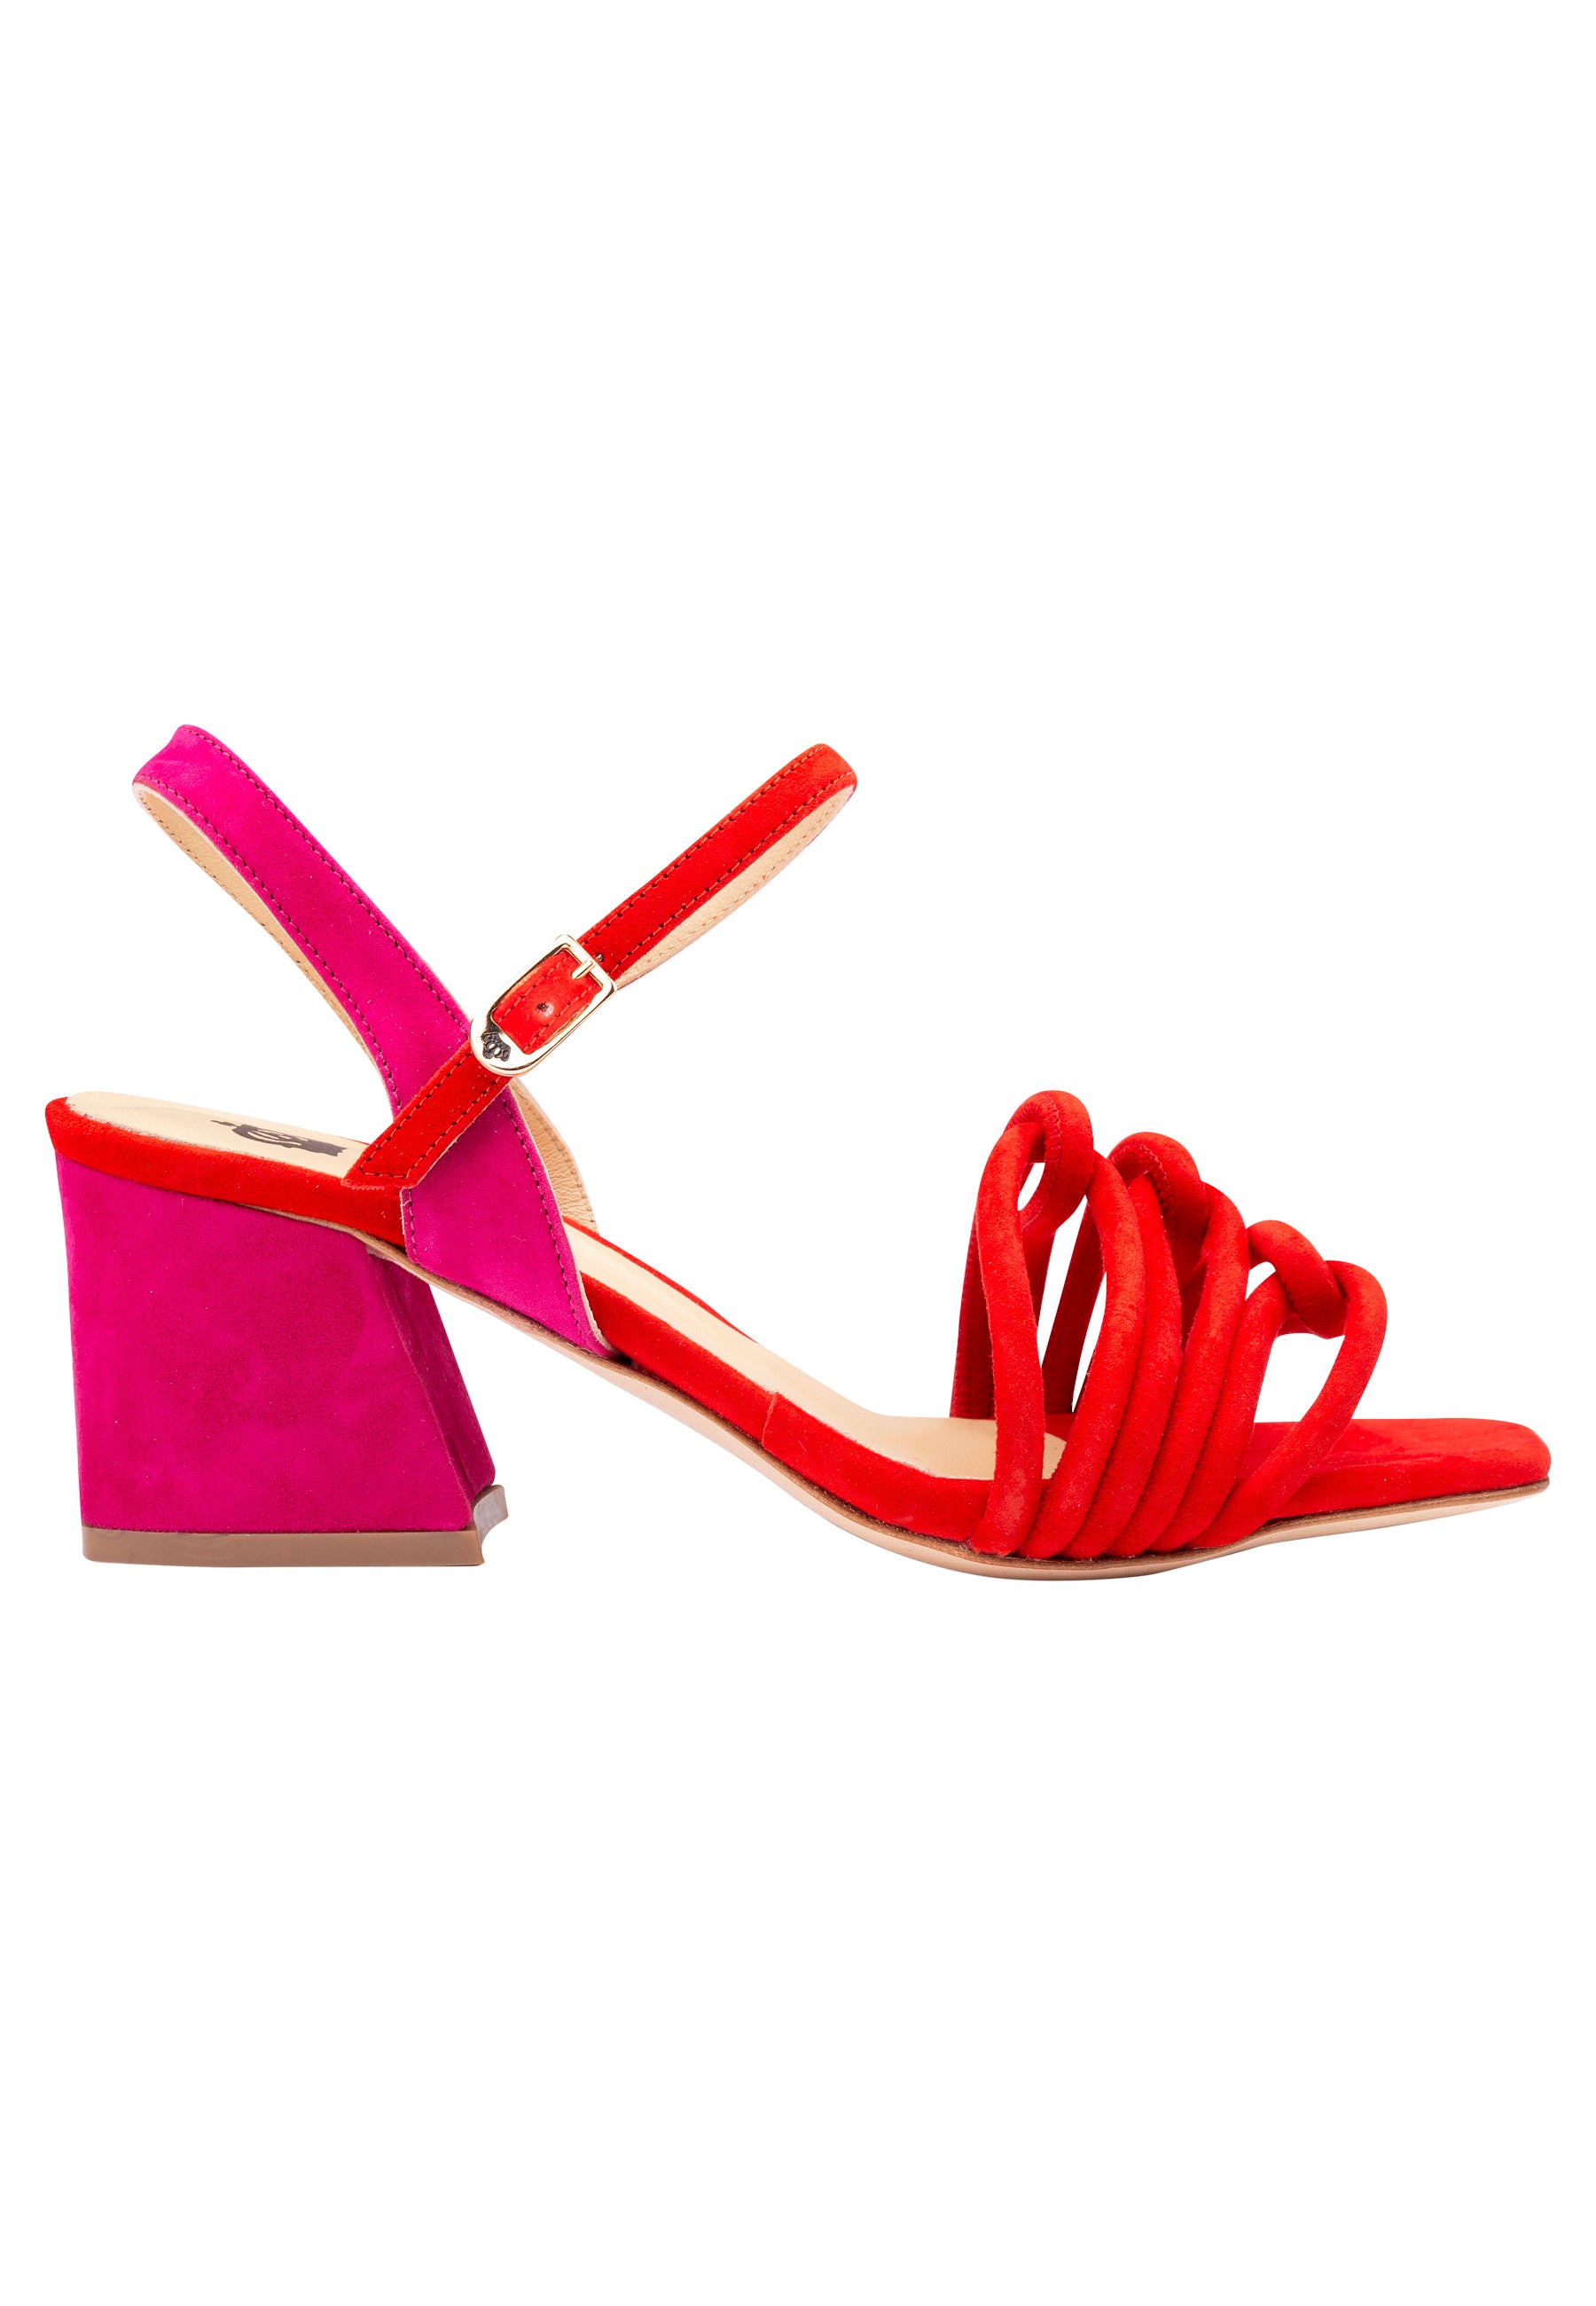 Women's sandals in red and fuchsia suede with ankle strap and leather sole